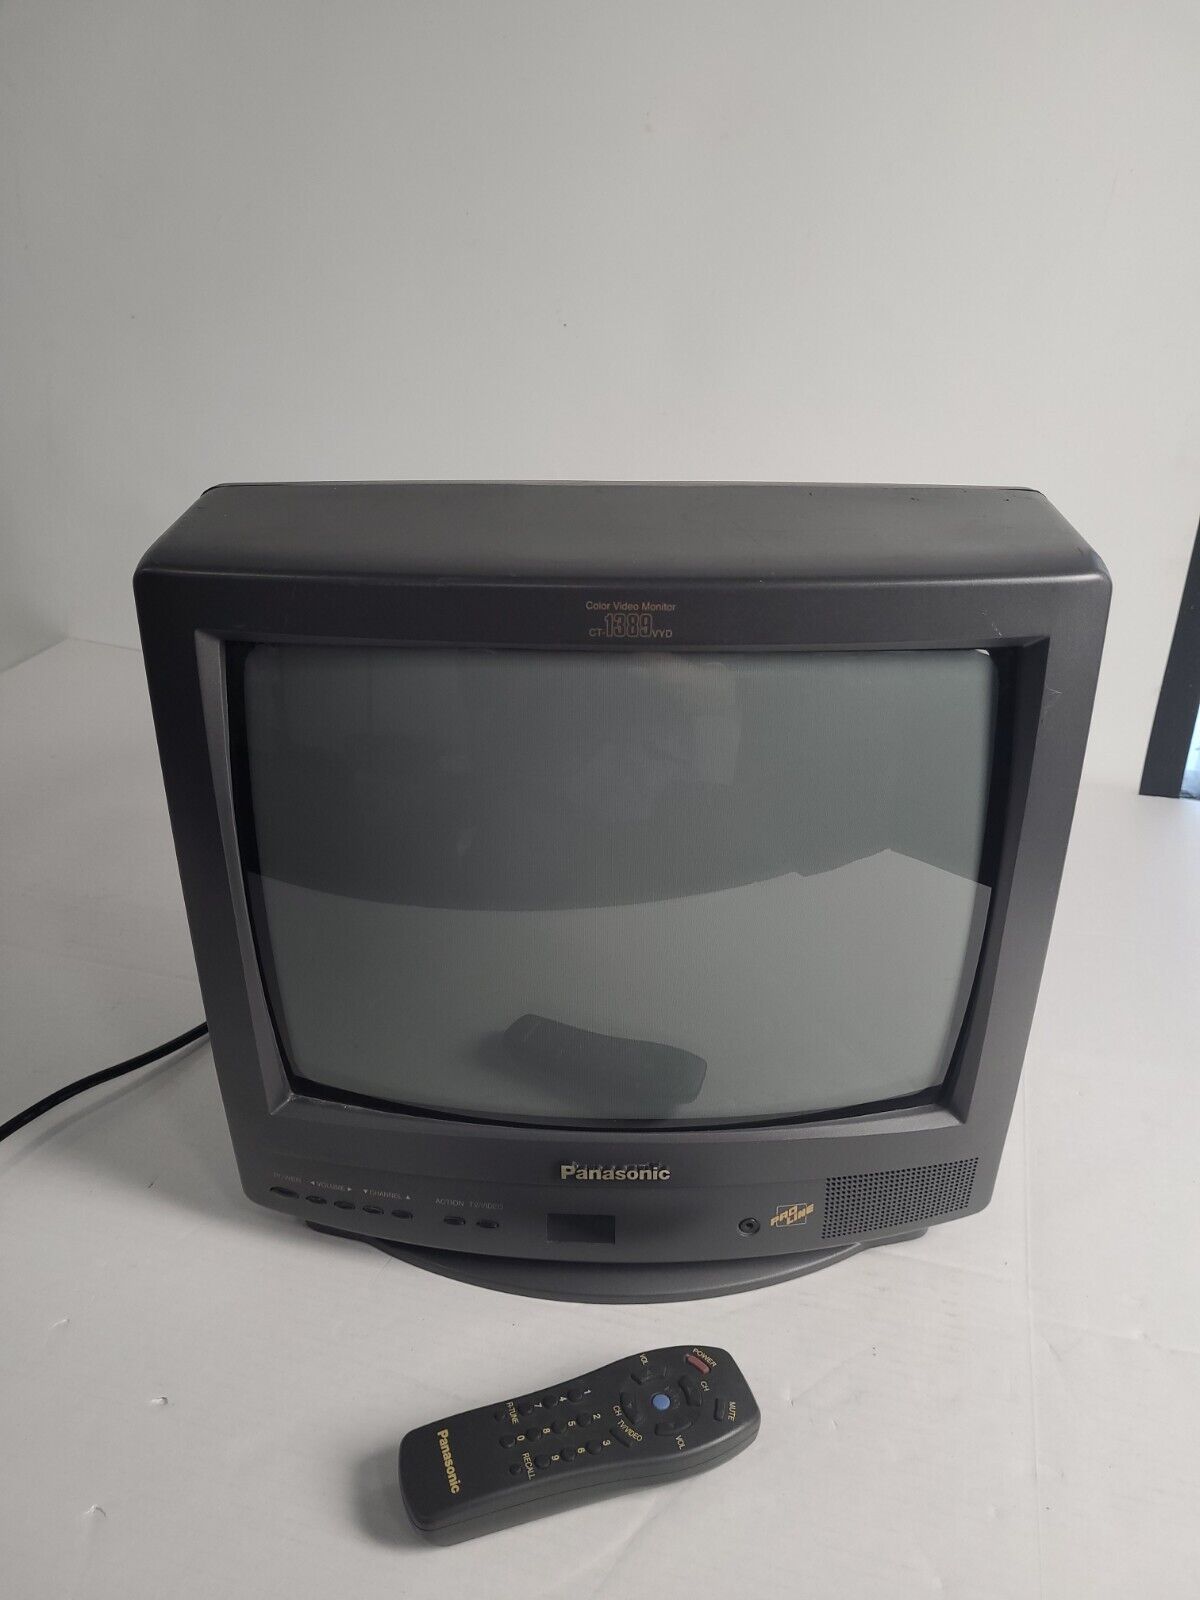 Panasonic Color Video Monitor Ct-1389vyd With Remote